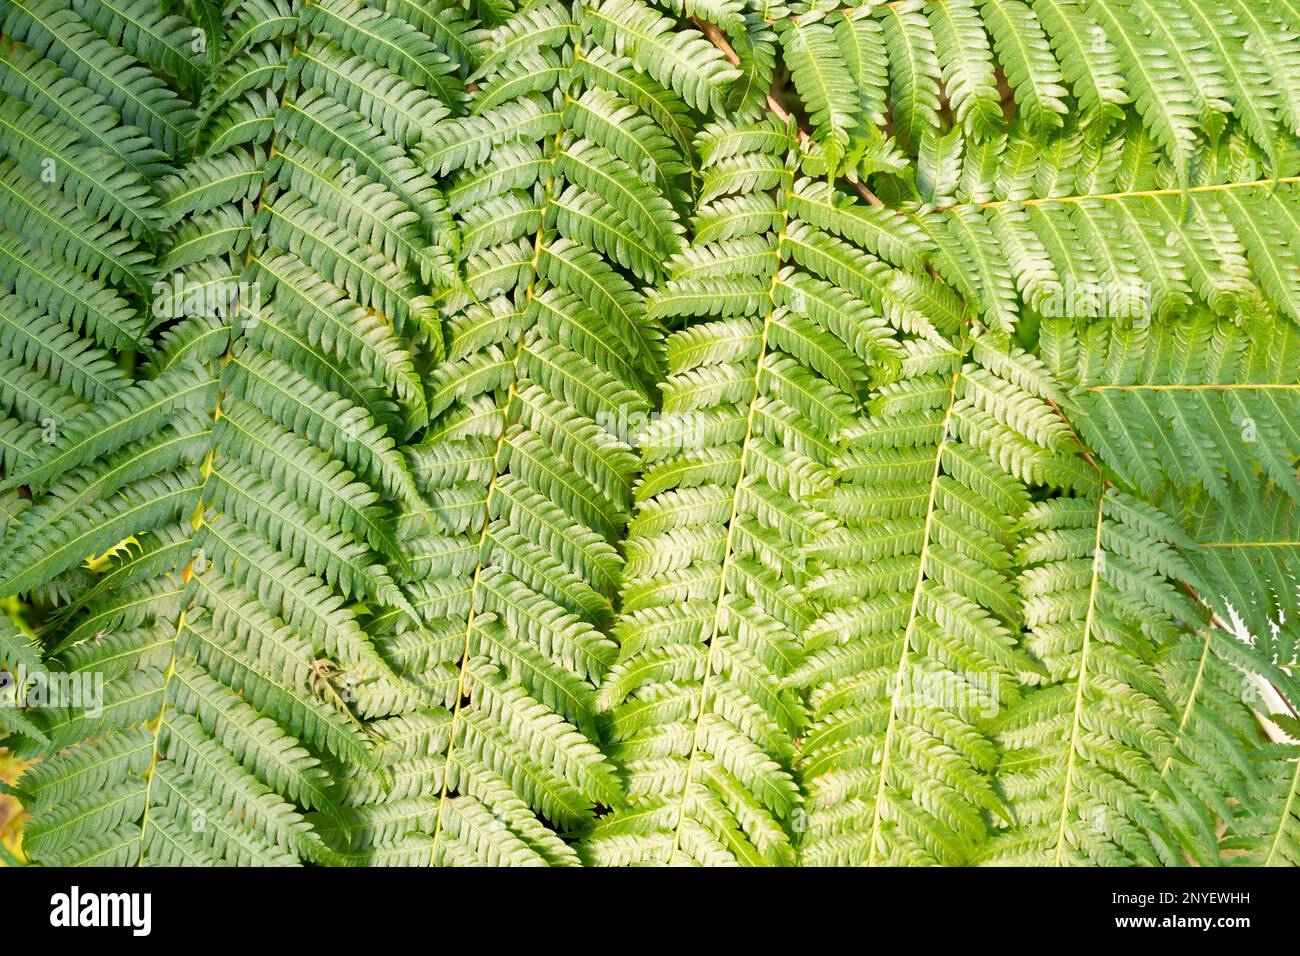 Close up of green fern leaves texture as background in natural light. Stock Photo